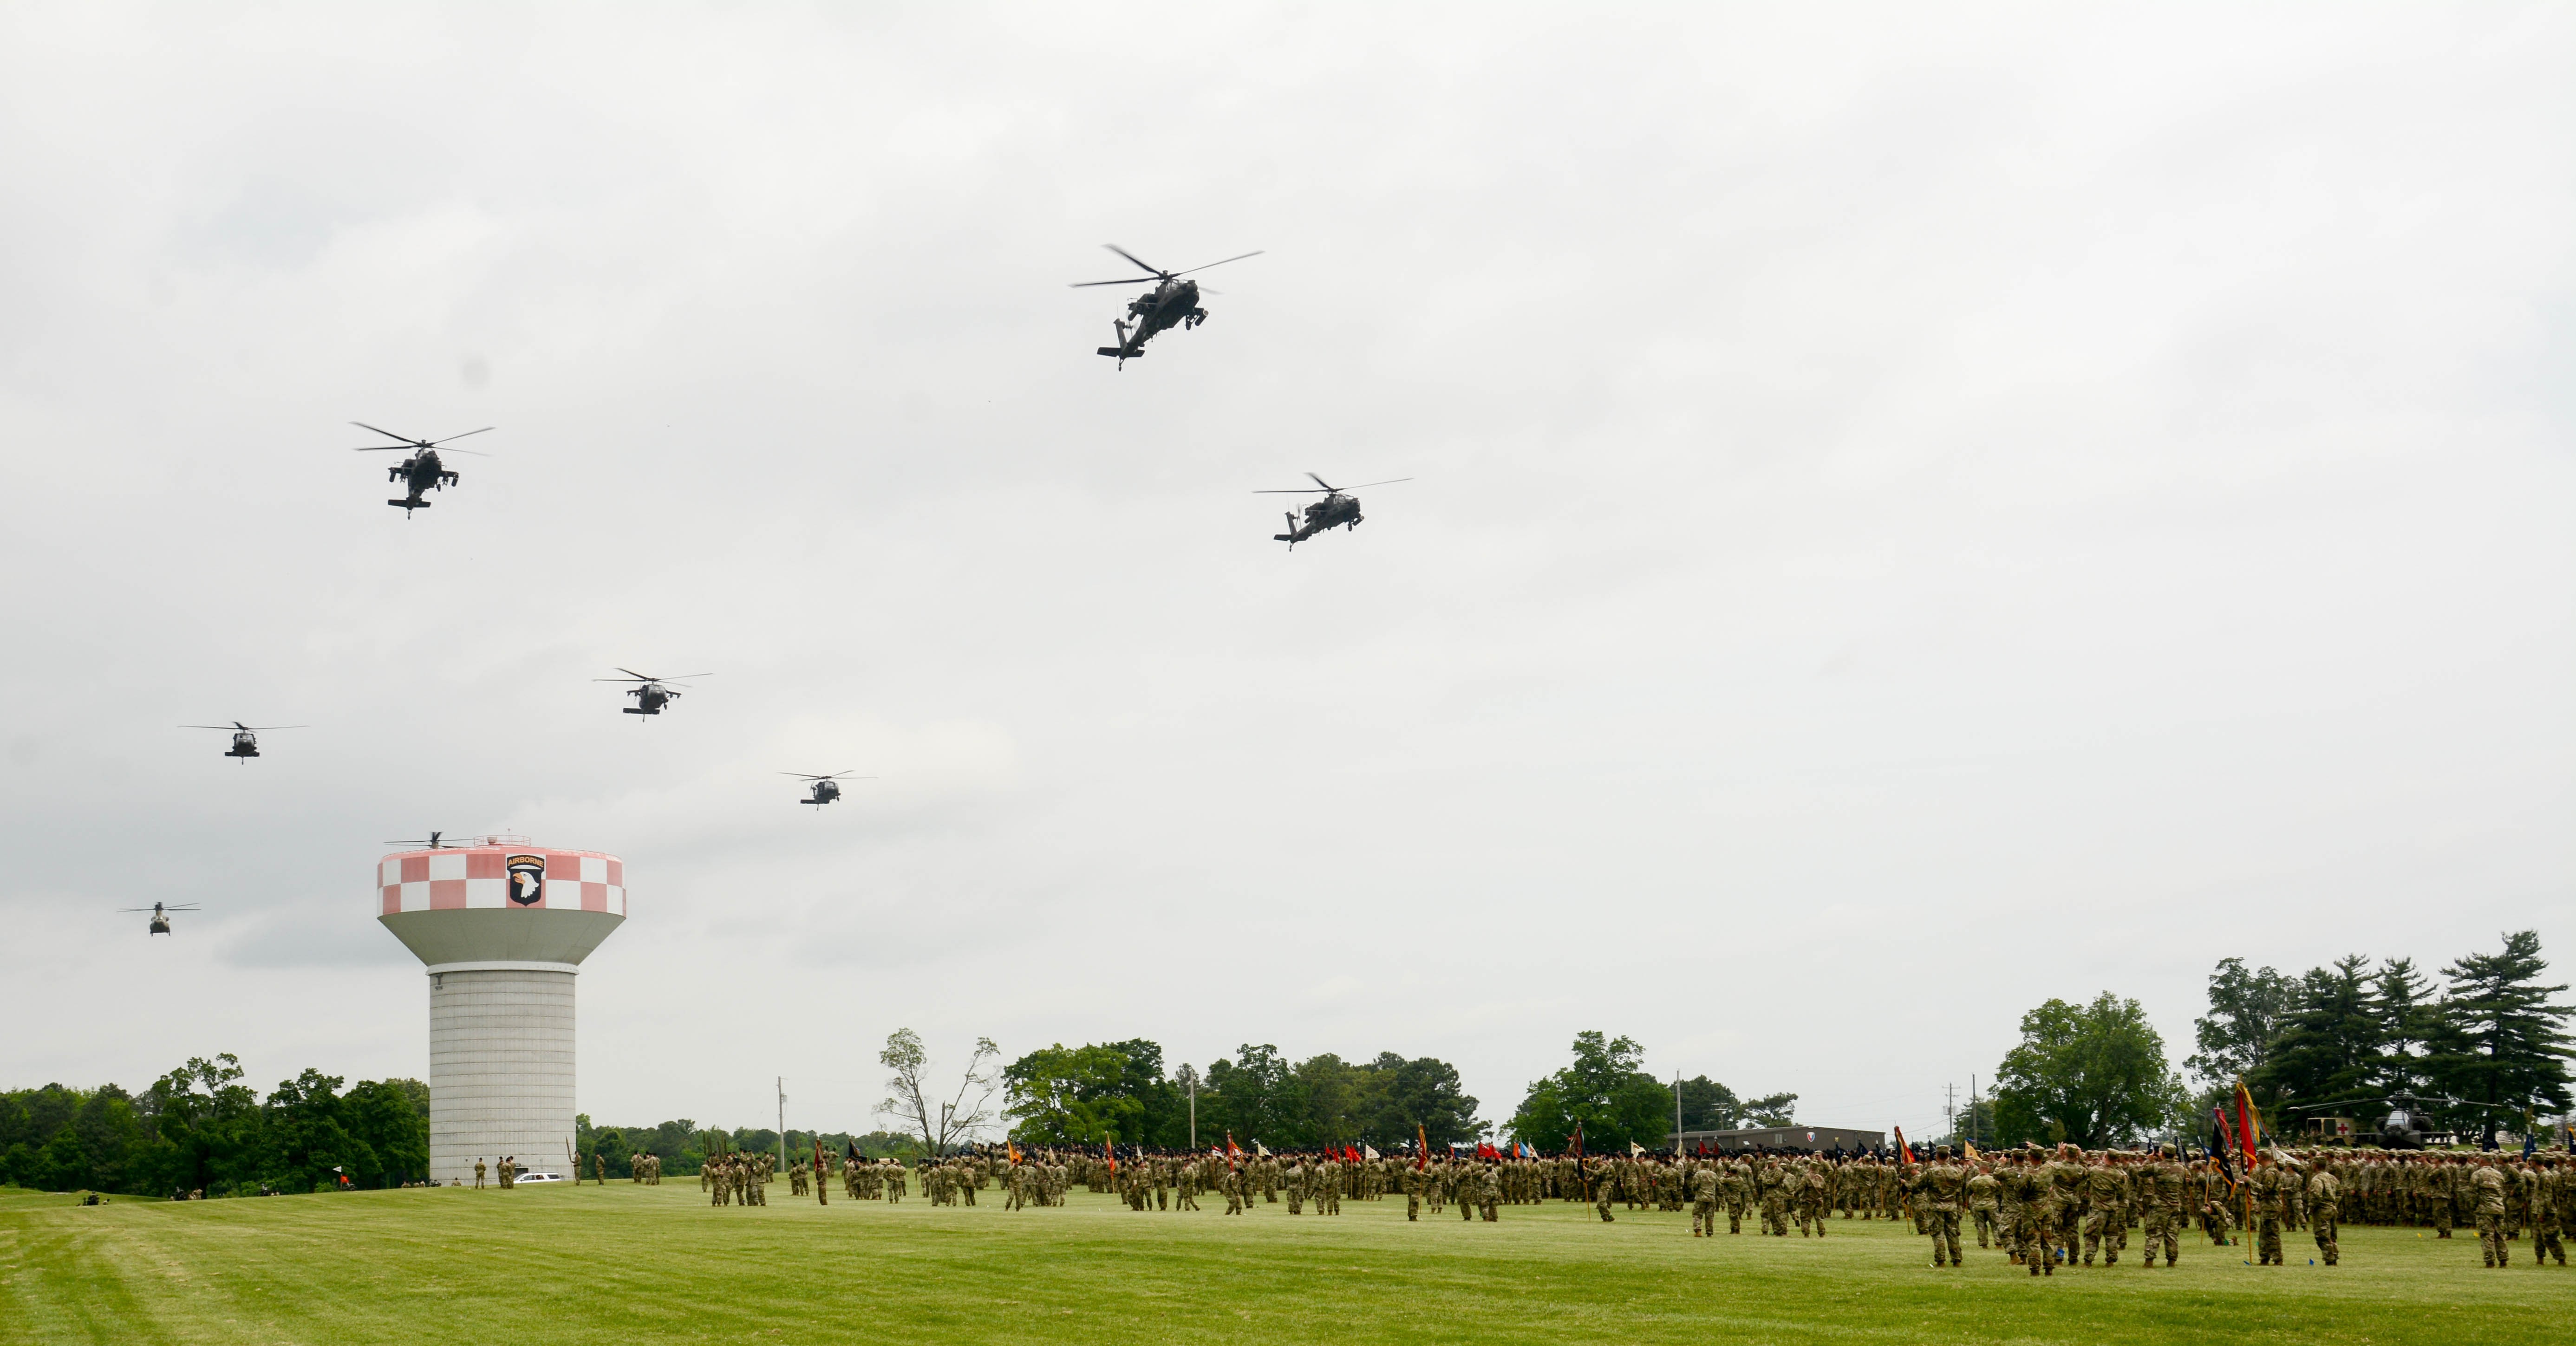 101st Airborne Division, Fort Campbell honor the past with 'Week of the